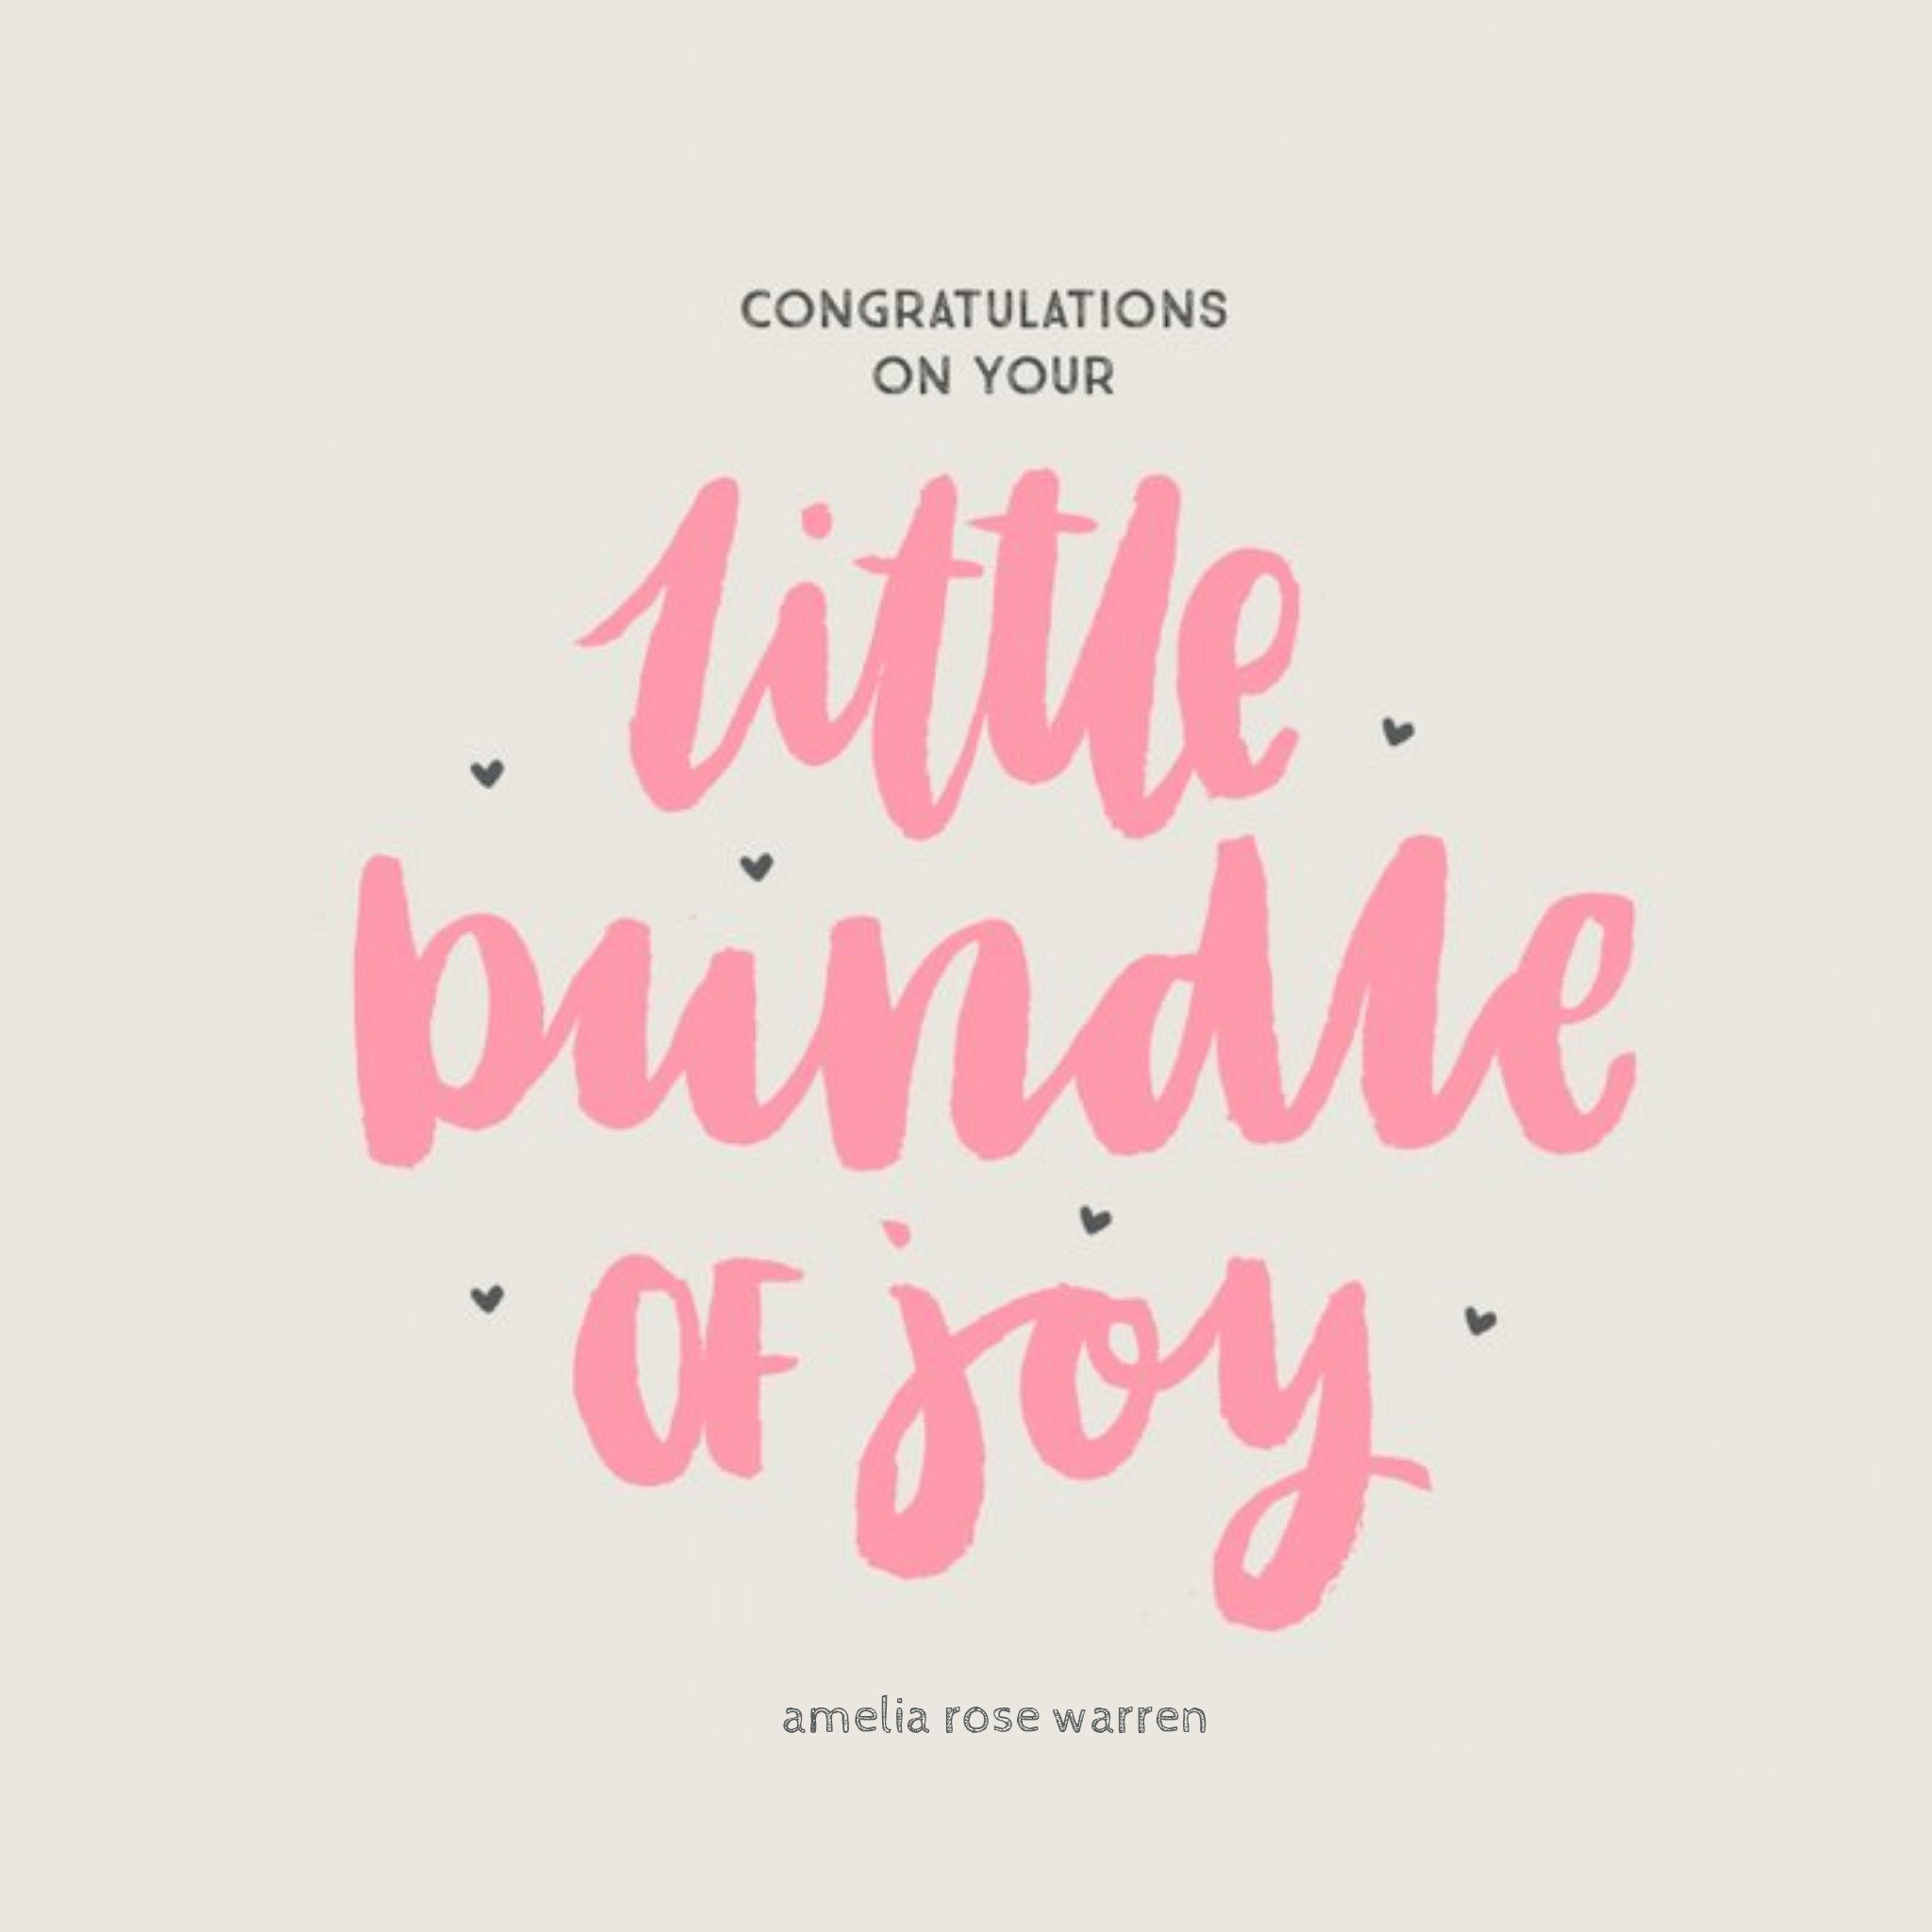 Moonpig Personalised Congrats On You Bundle Of Joy New Baby Card, Square